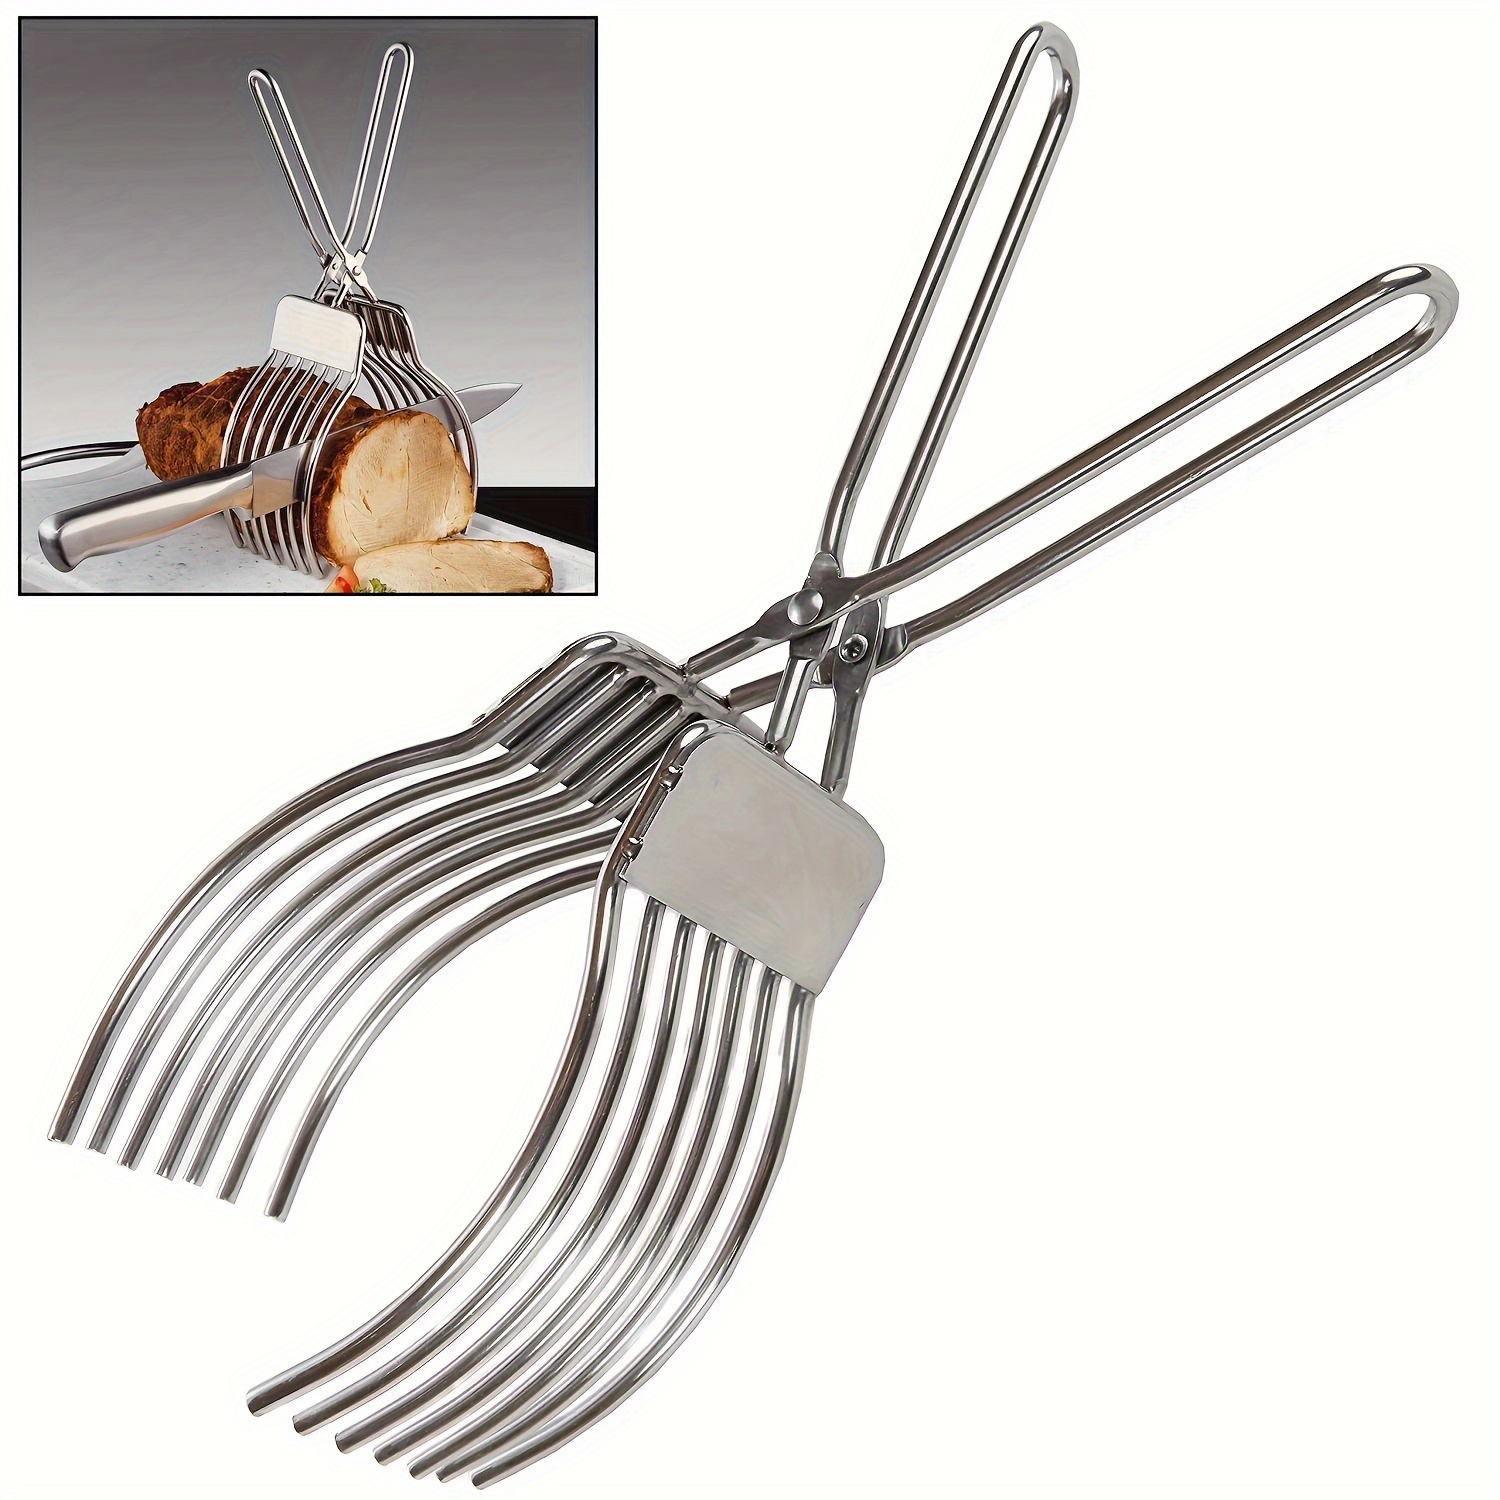 

1pc, Stainless Steel Roast Beef Cutting Tongs, Meat Bread Slicing Tong, Portable Barbecue Tongs, Onion Tomato Holder For Slicing Vegetable Fruits Cutting, Kitchen Stuff